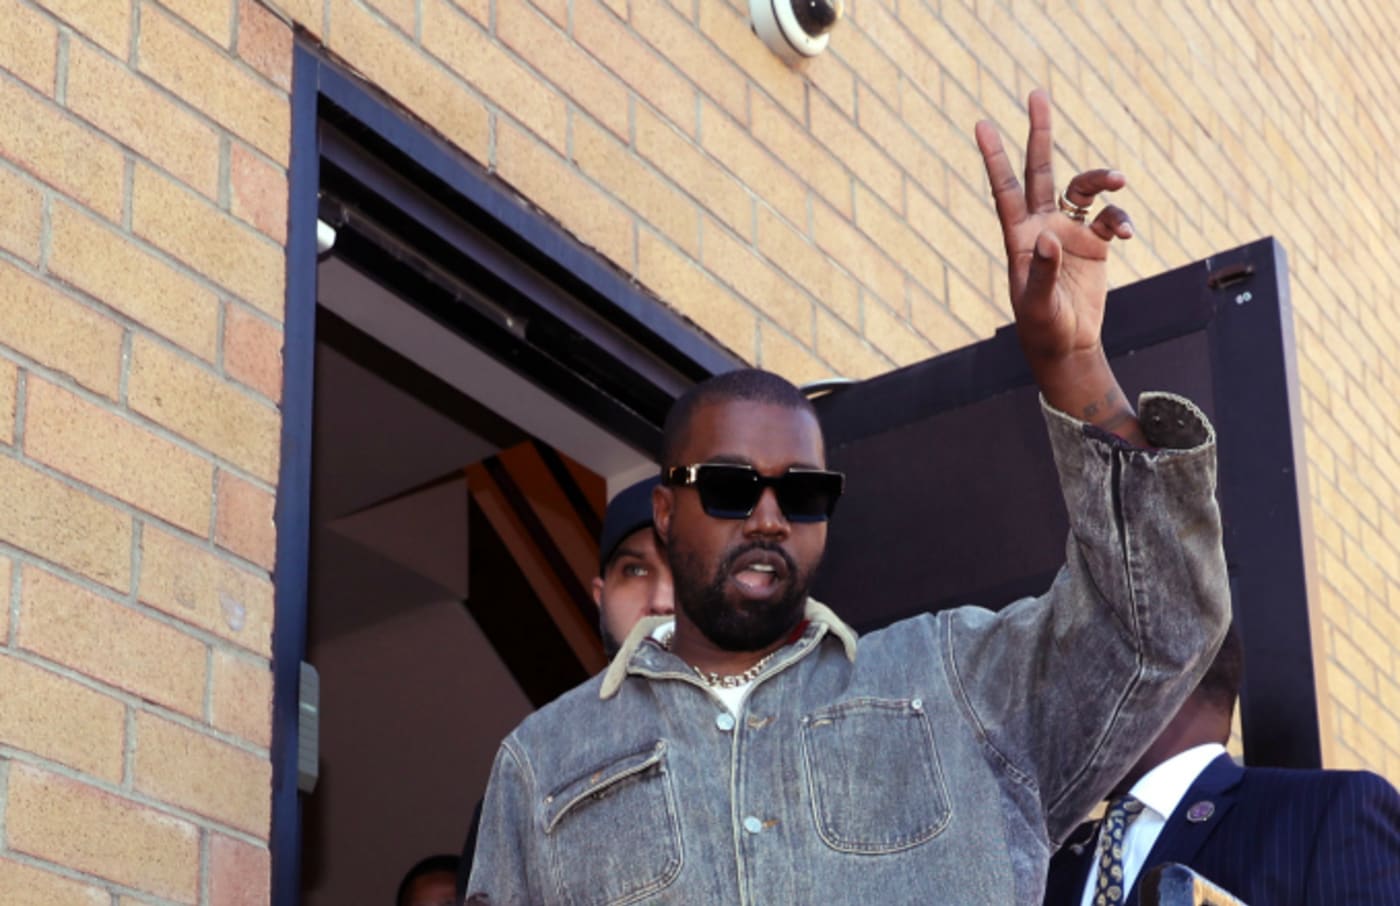 Kanye West attends Sunday Service at The Greater Allen A.M.E. Cathedral